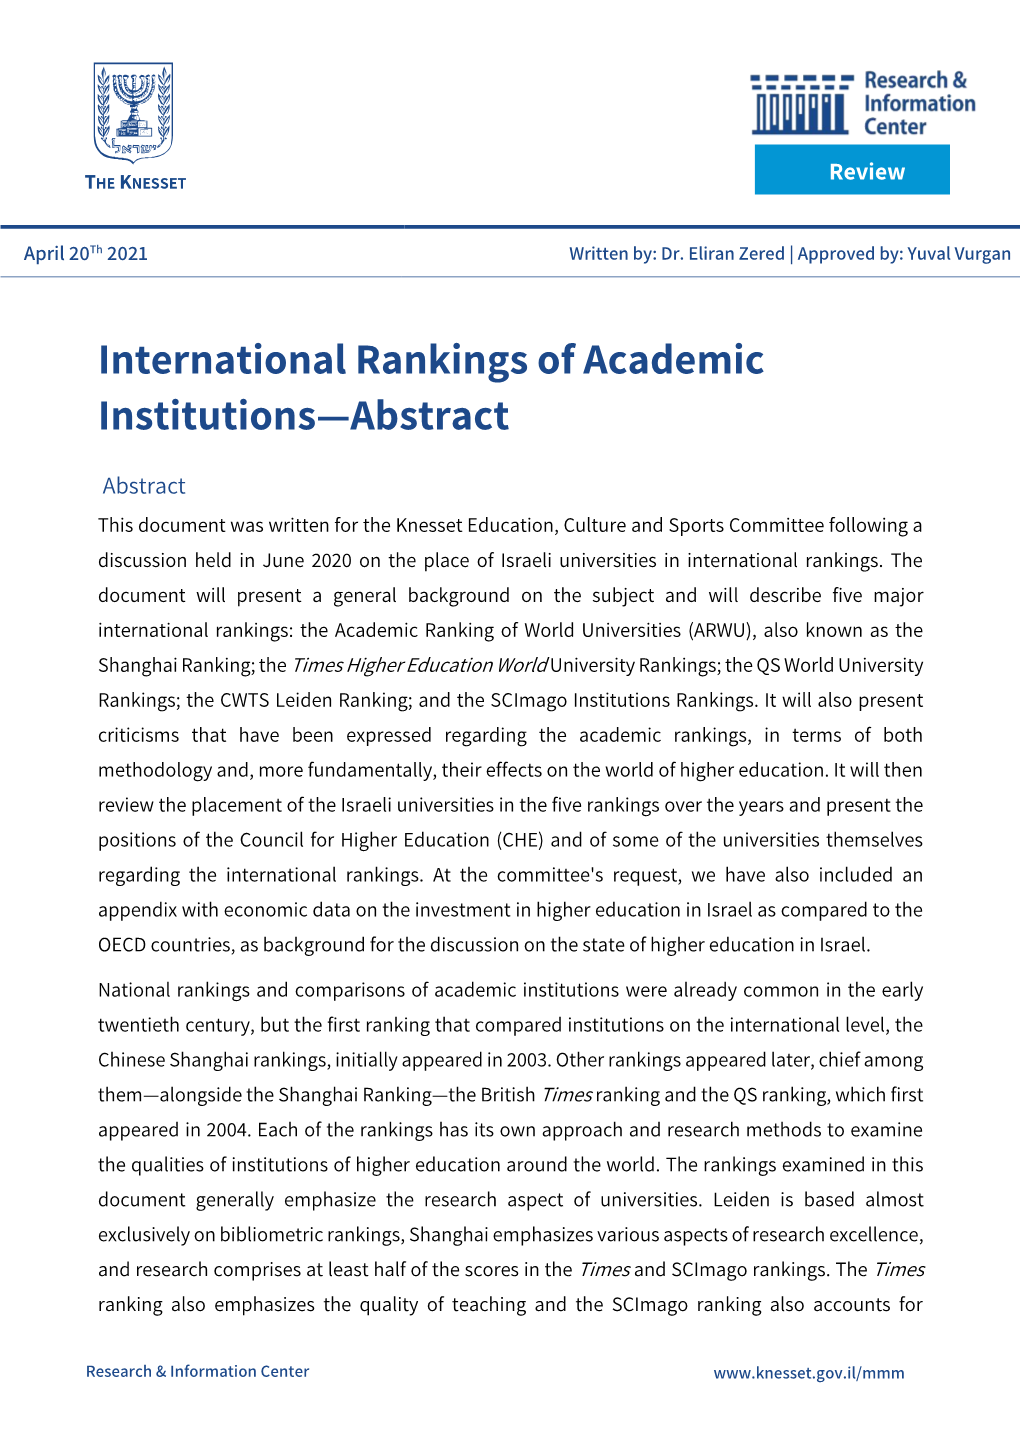 International Rankings of Academic Institutions—Abstract